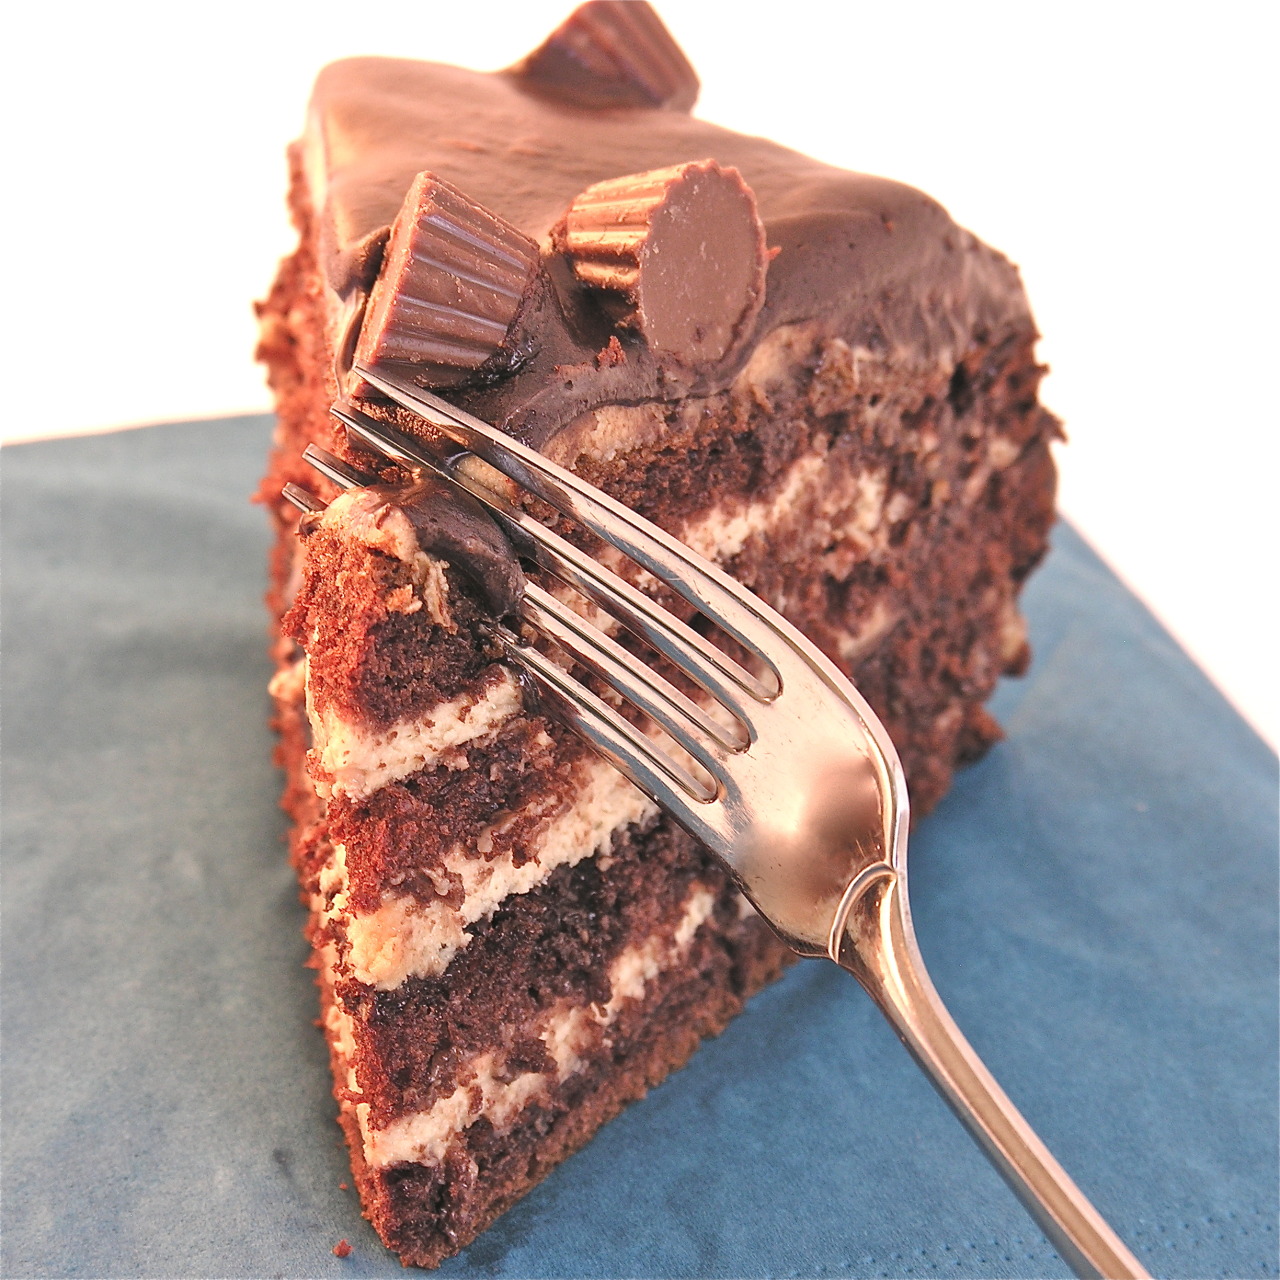 Peanut Butter Cup Layer Cake